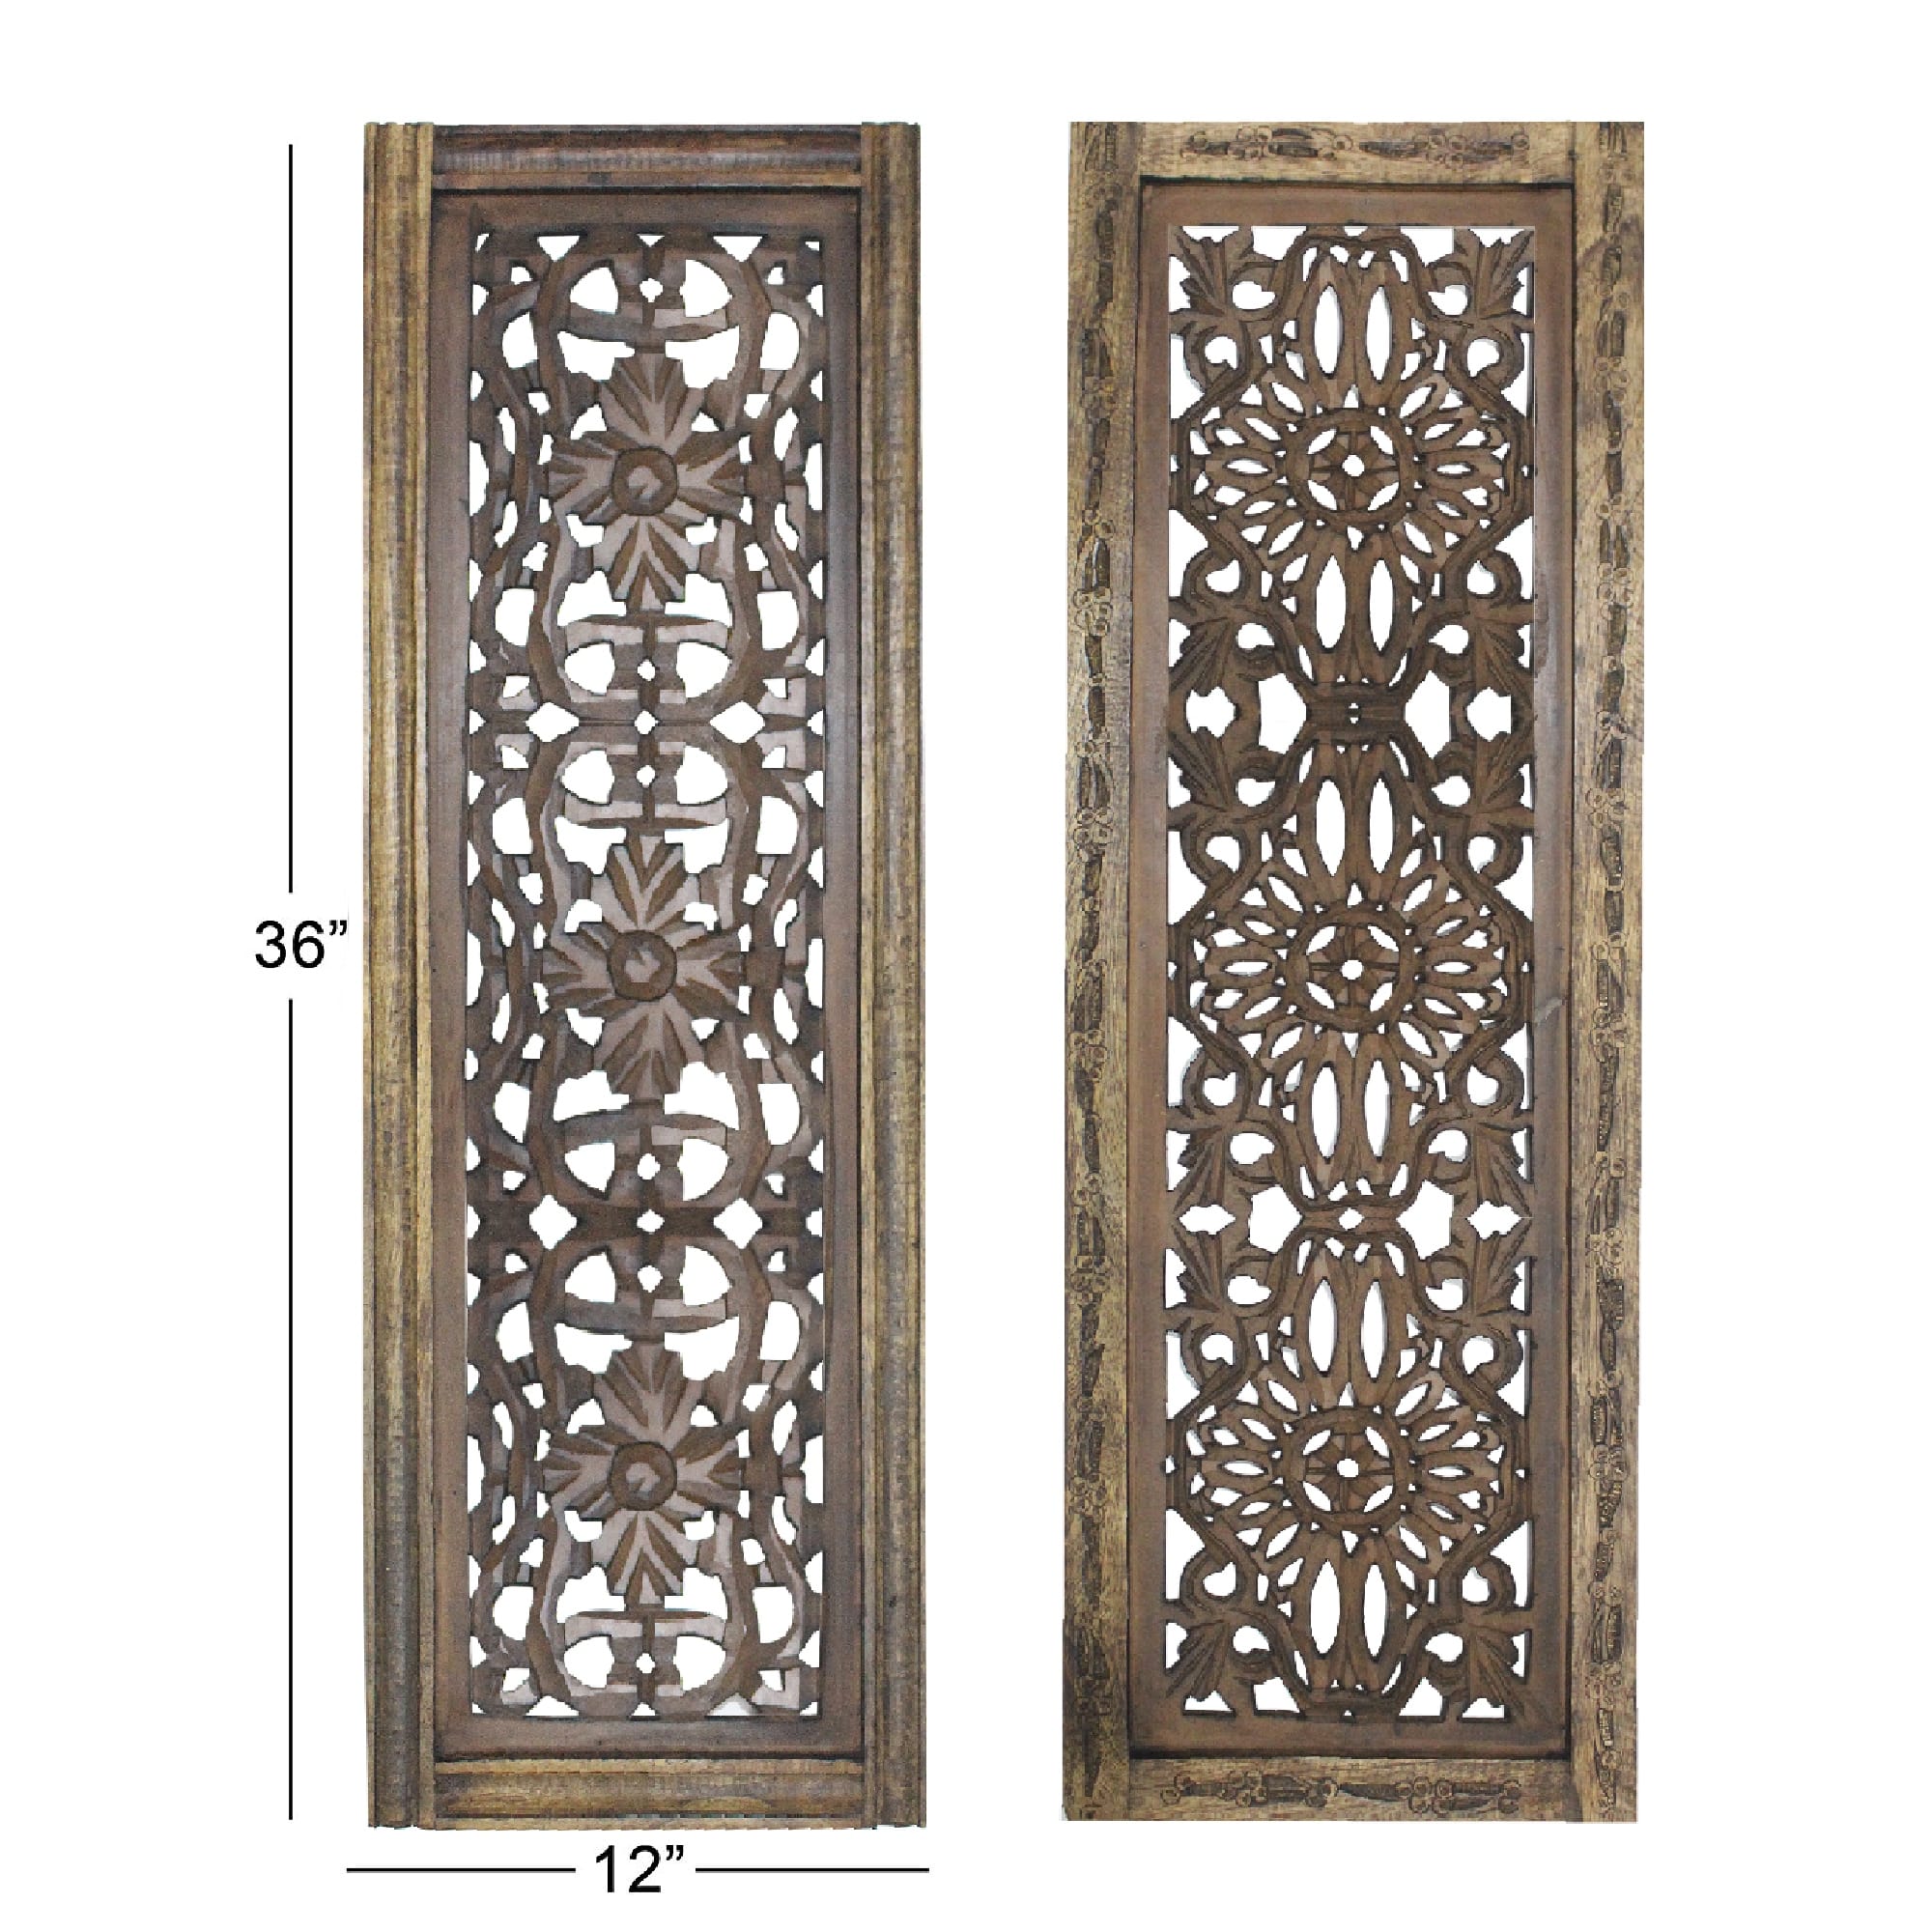 Benzara Floral Hand Carved Wooden Wall Panels, Assortment of Two, Brown ...